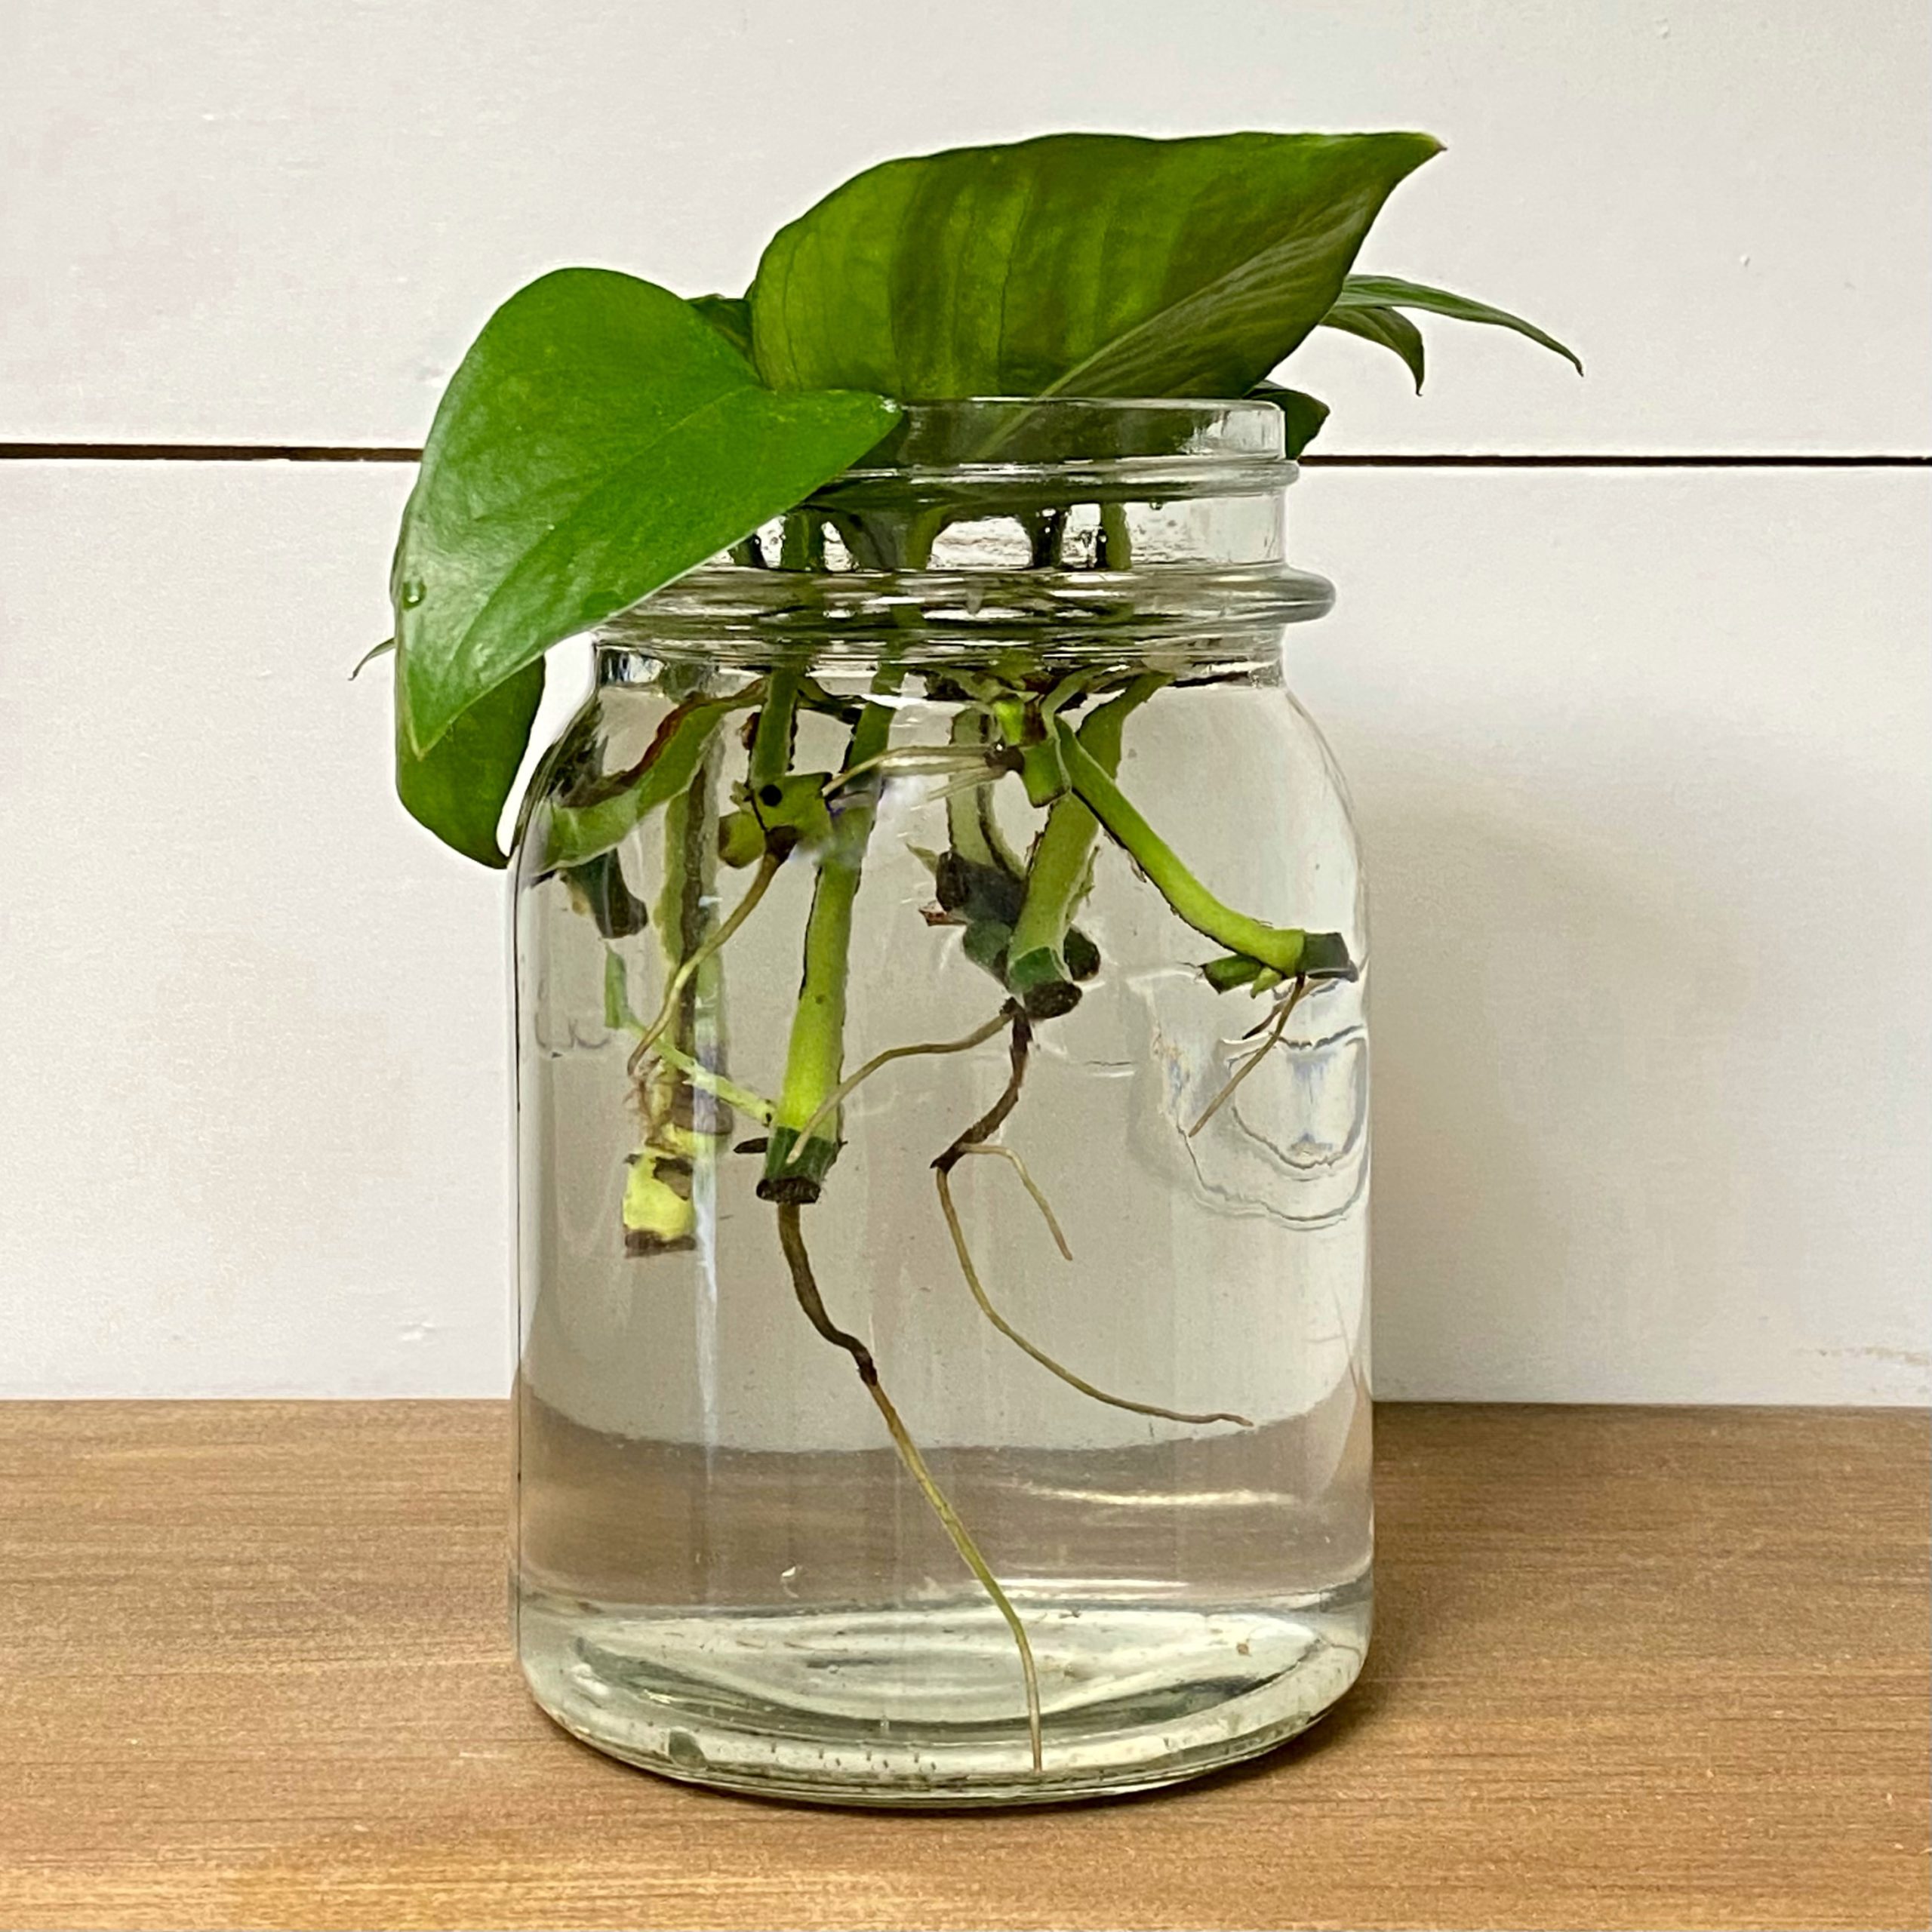 Pothos leaves rooting in a jar with water on a shelf.